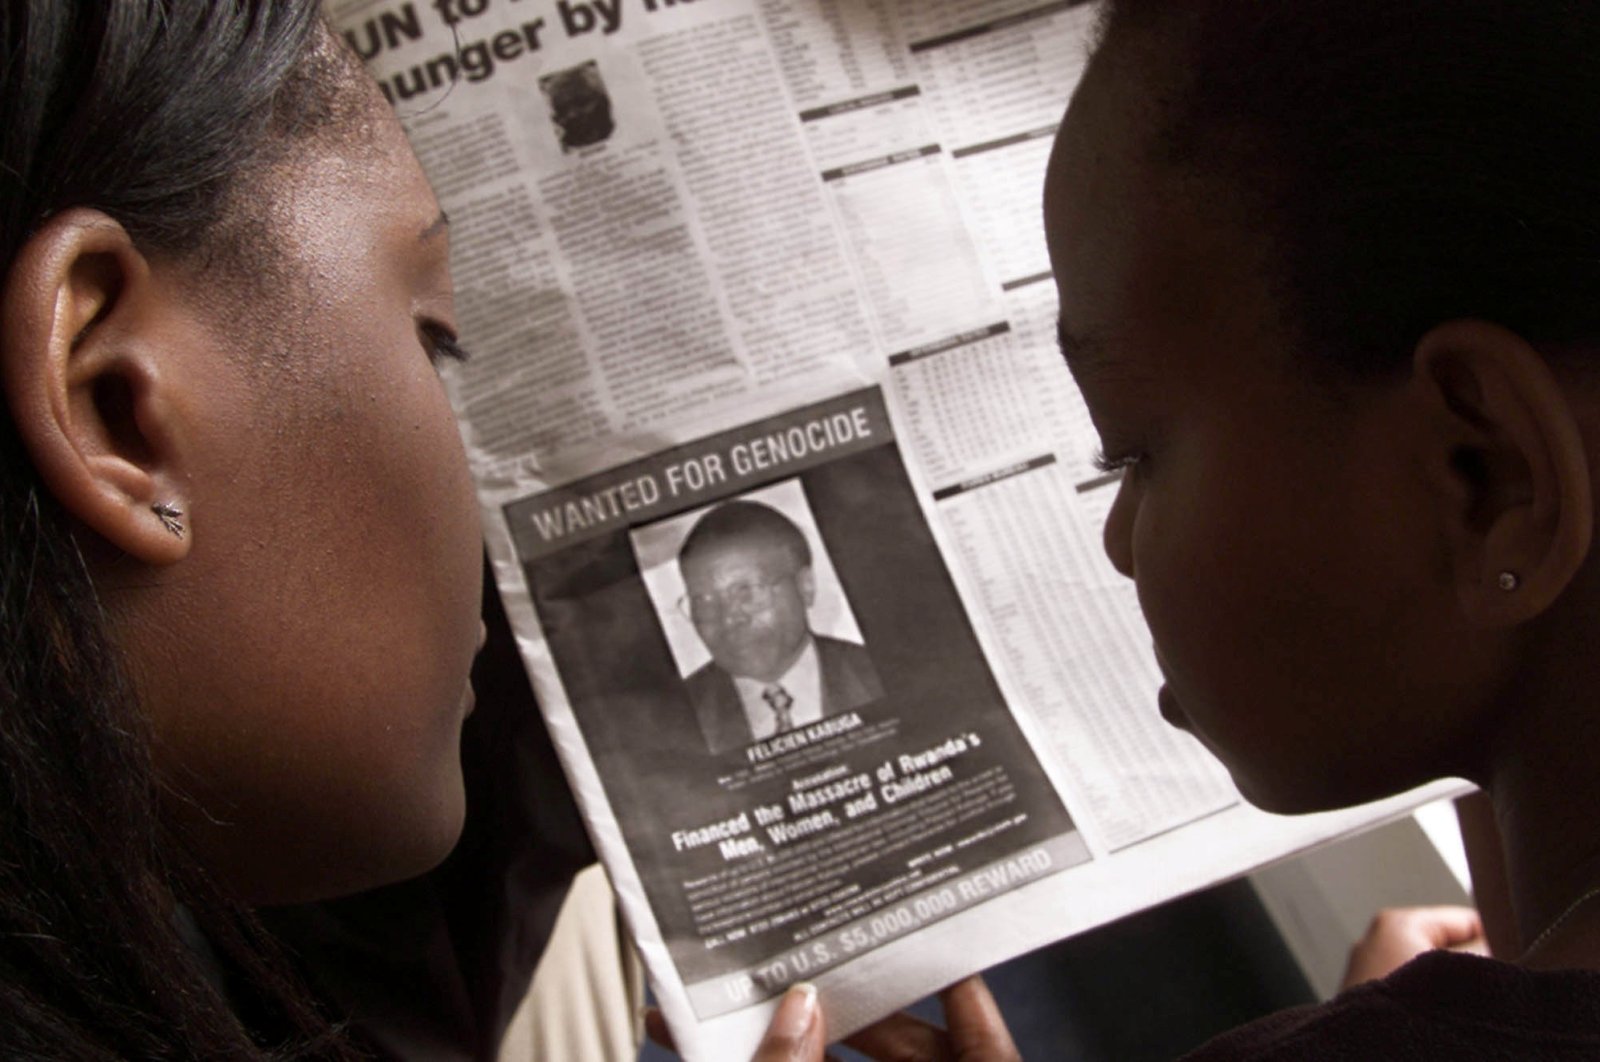 Readers look at a June 12, 2002 newspaper in Nairobi, Kenya featuring the photograph of Rwandan Felicien Kabuga wanted by the United States. (Reuters Photo)